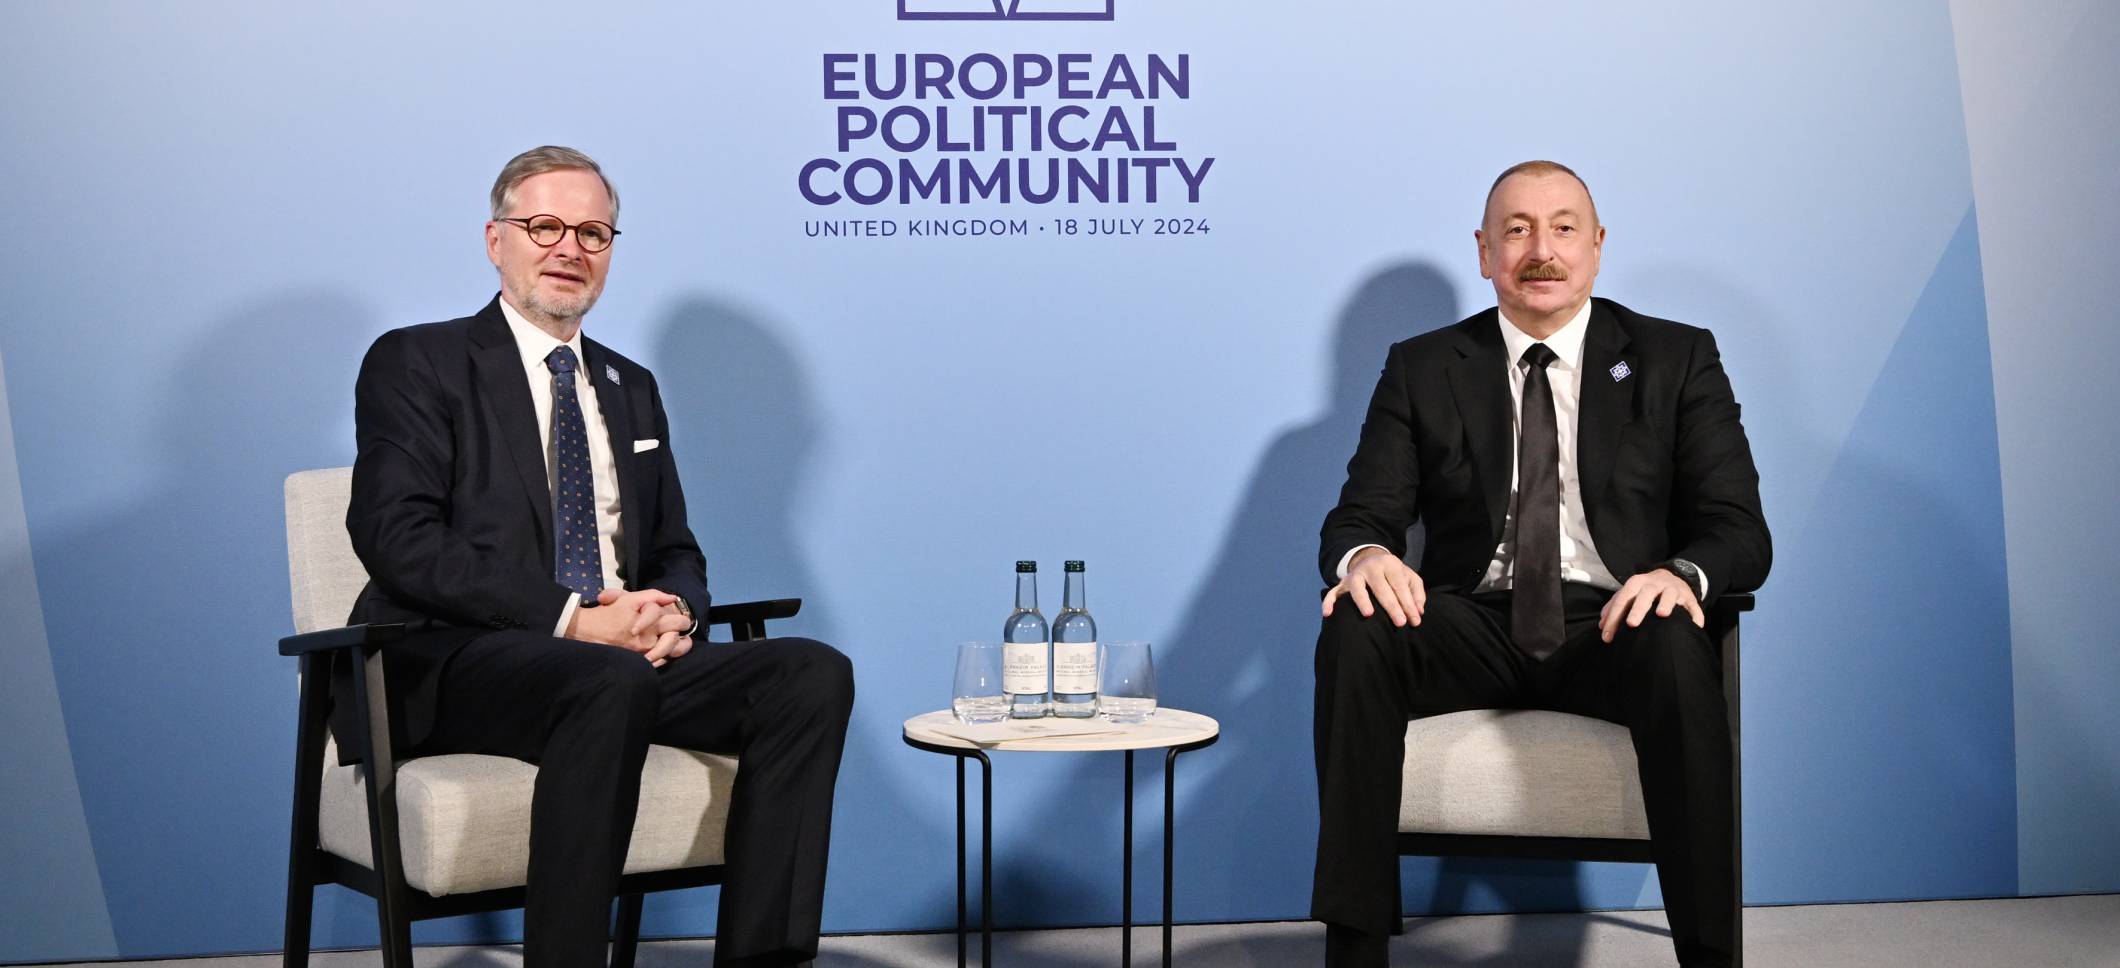 Ilham Aliyev met with Prime Minister of the Czech Republic Petr Fiala in Oxford